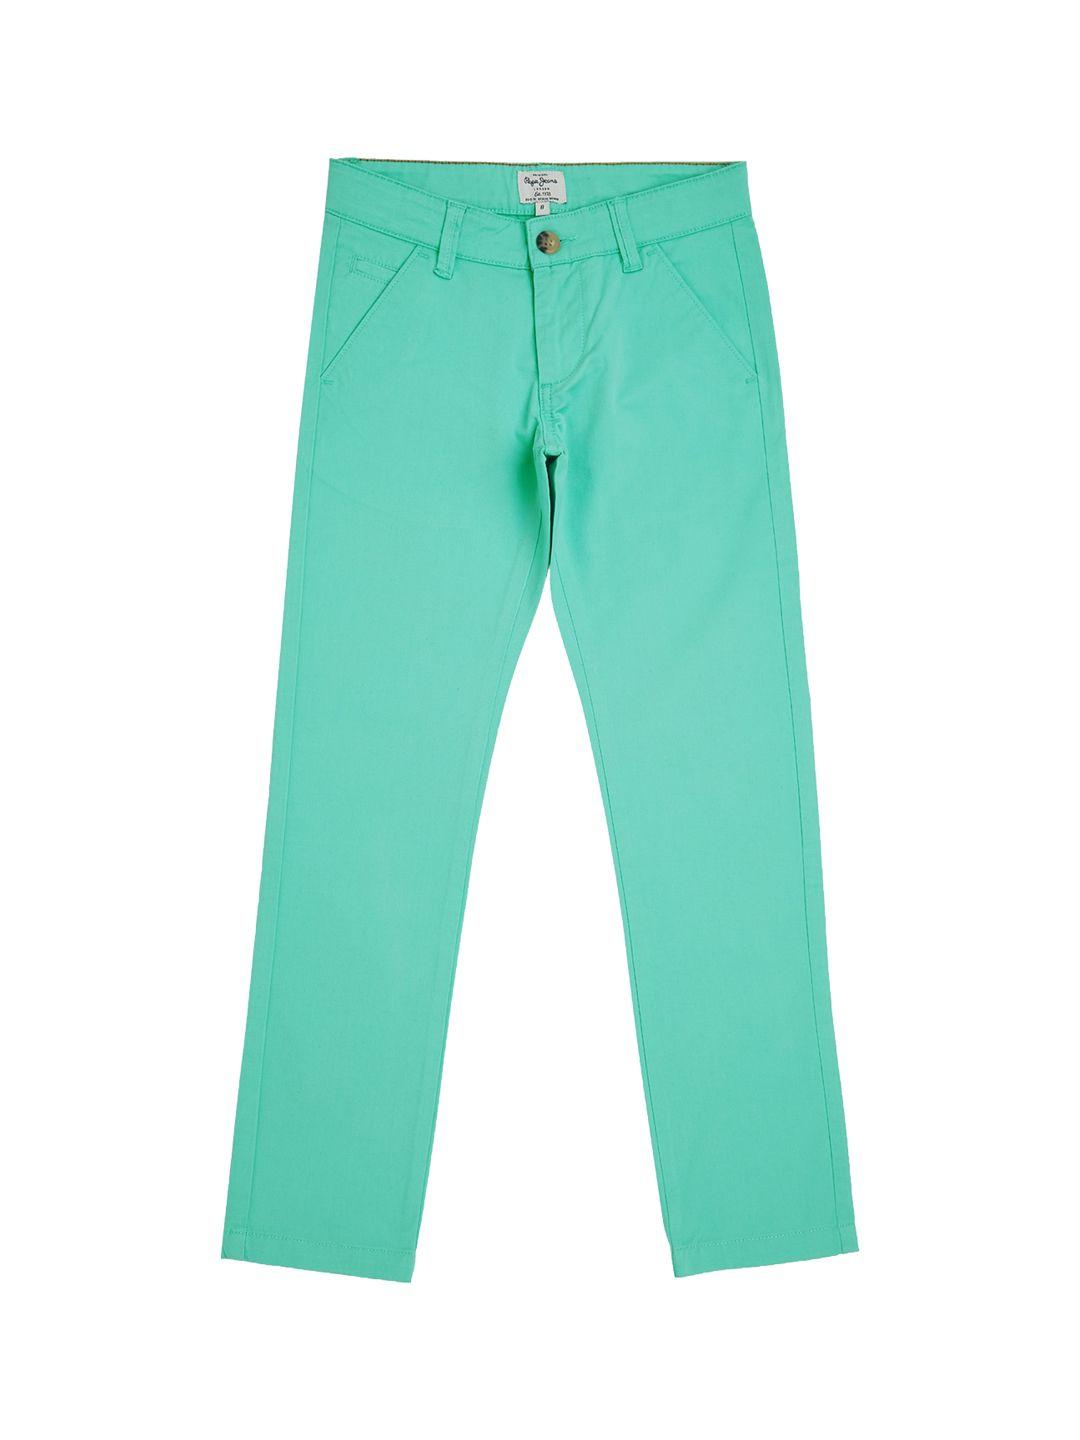 pepe-jeans-boys-sea-green-regular-fit-winter-chinos-trousers